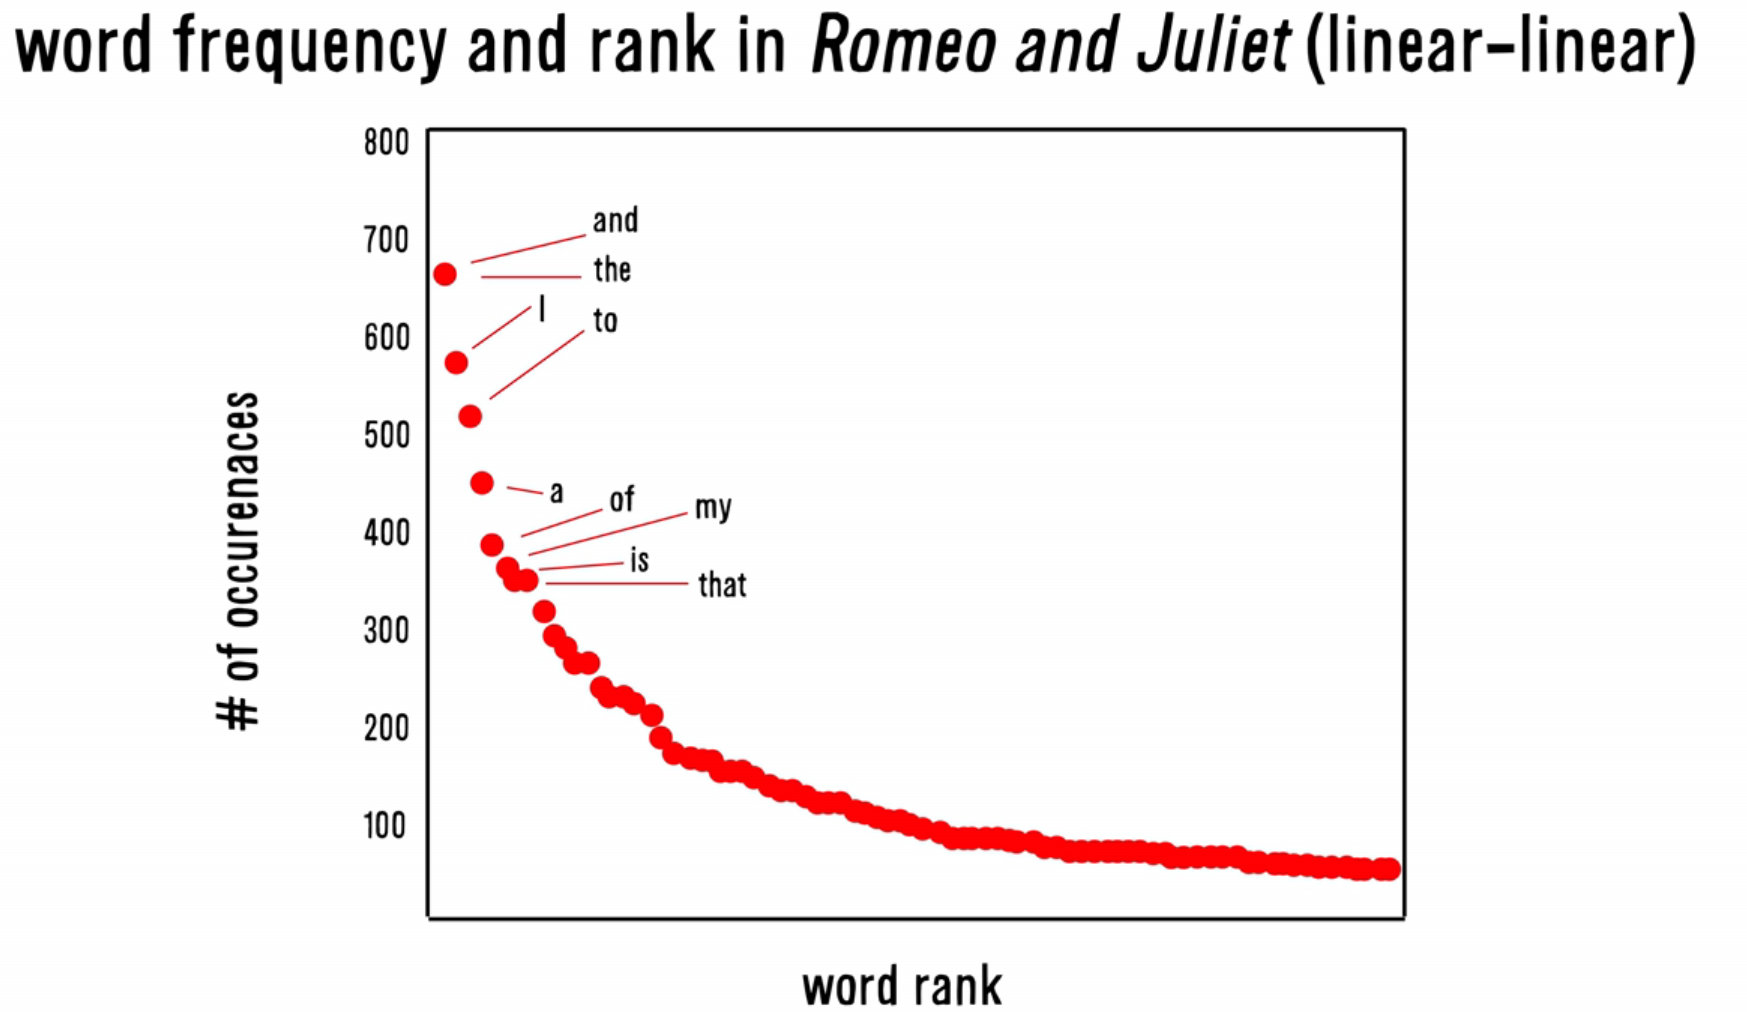 graph showing a power curve of the word frequencies in Romeo and Juliette. The most common words are the and I to a of my is that. The frequency rapidly decreases for each new word.